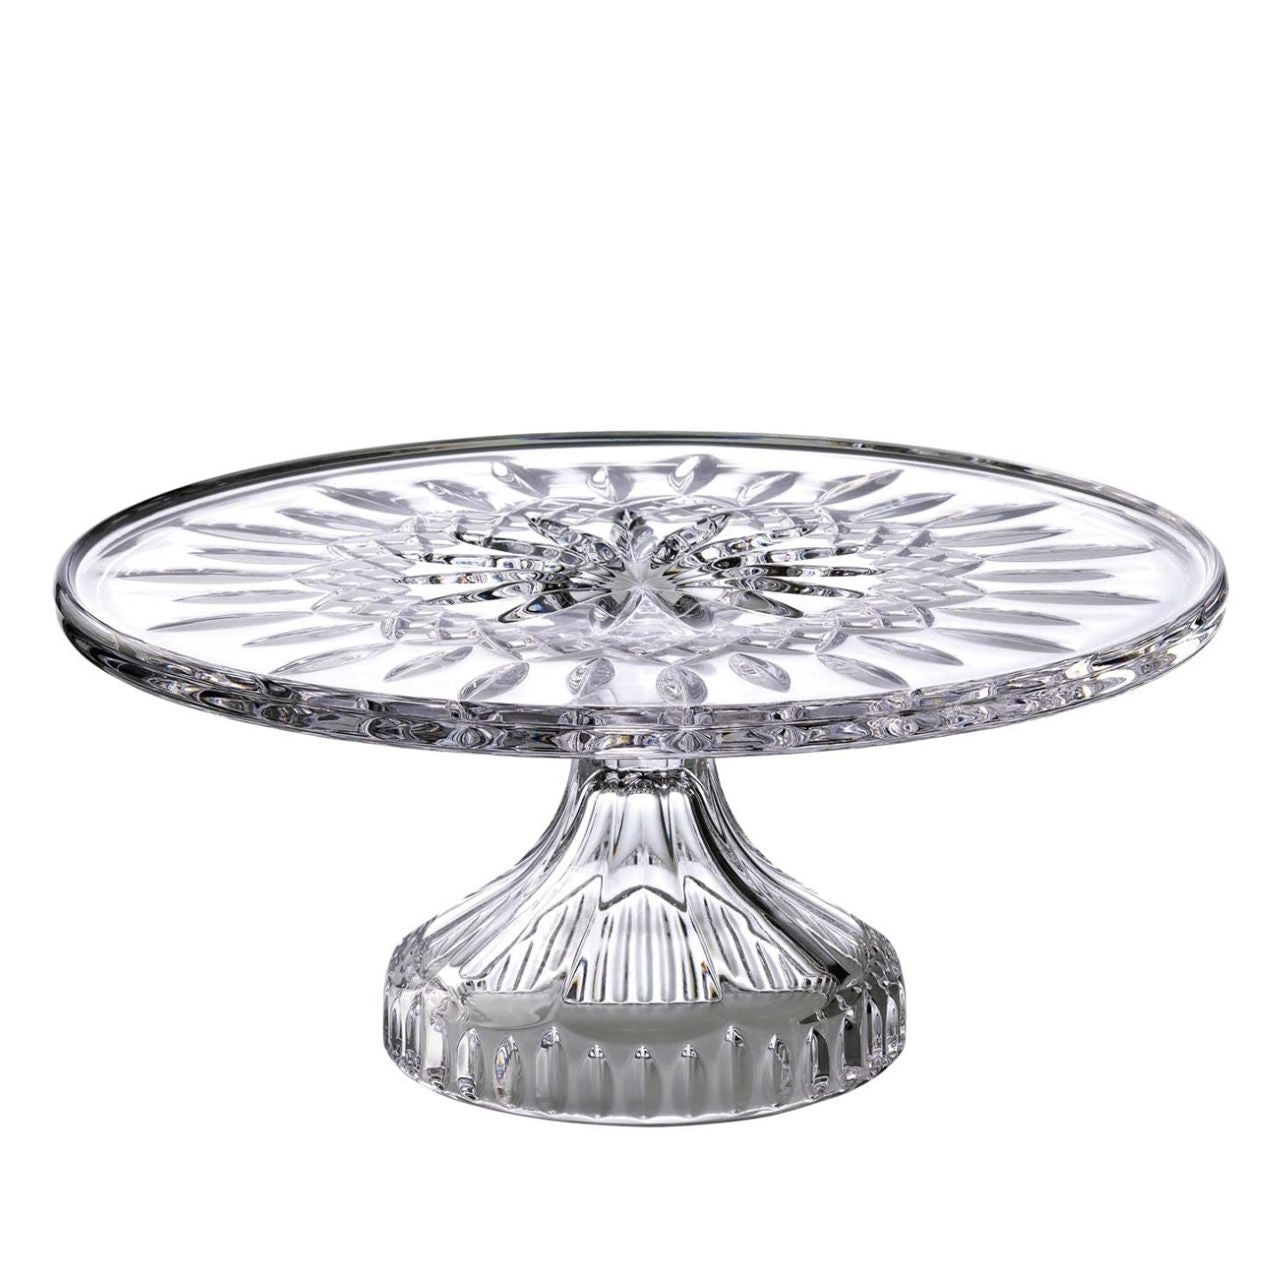 Waterford Crystal Lismore Cake Plate  Featuring the iconic Lismore pattern, the Lismore Gift Bar Collection is inspired by the rich heritage of Ireland with pieces designed to be used and enjoyed. The Lismore Cake Plate 11 inch is perfect for serving up delicious cakes, sandwiches and biscuits.